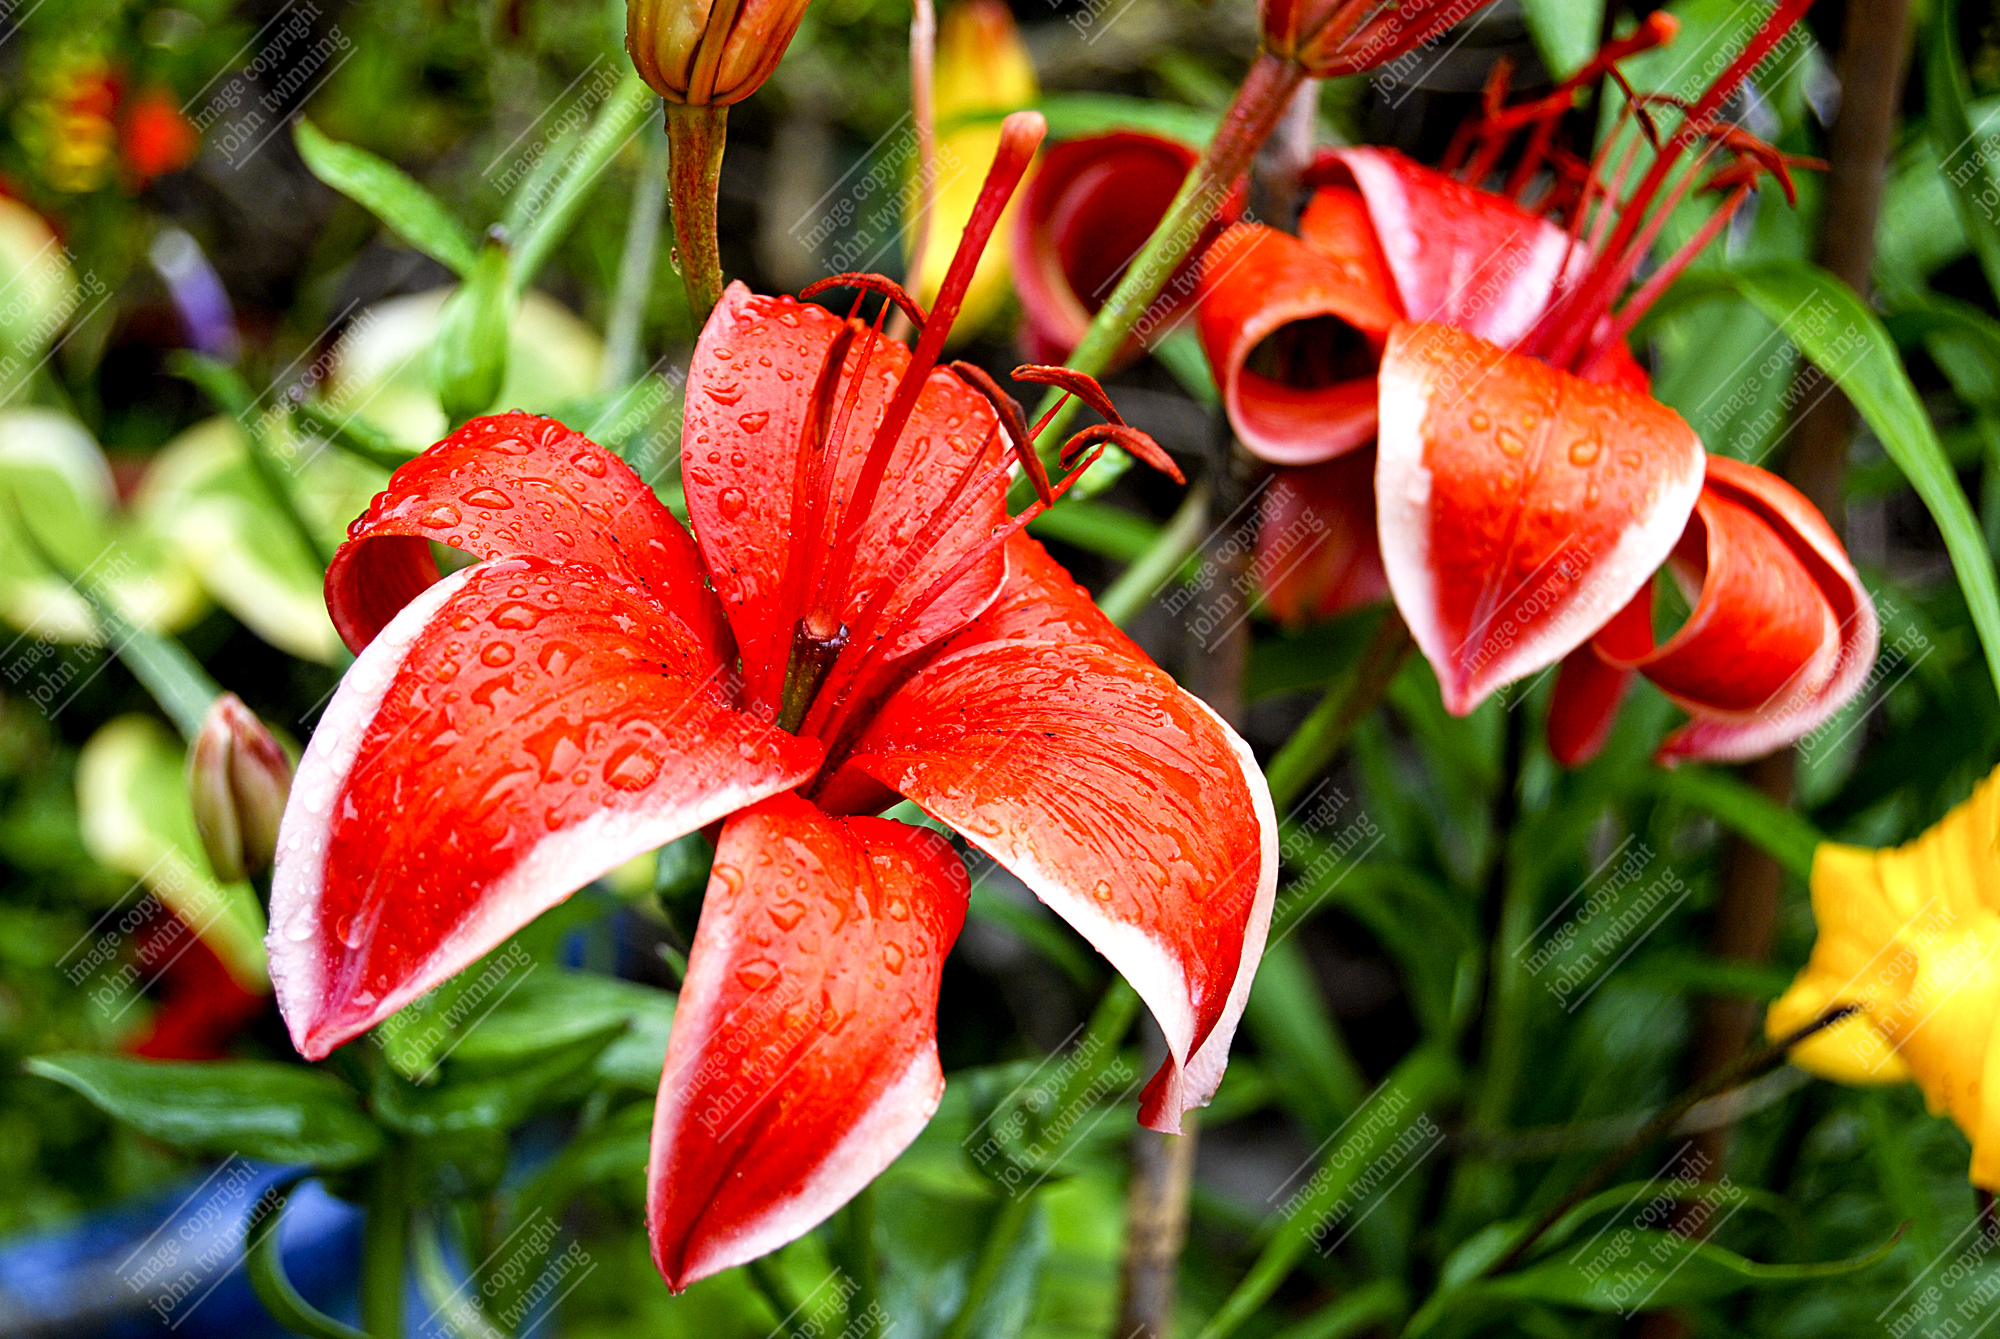 Lillies with raindrops (photograph)